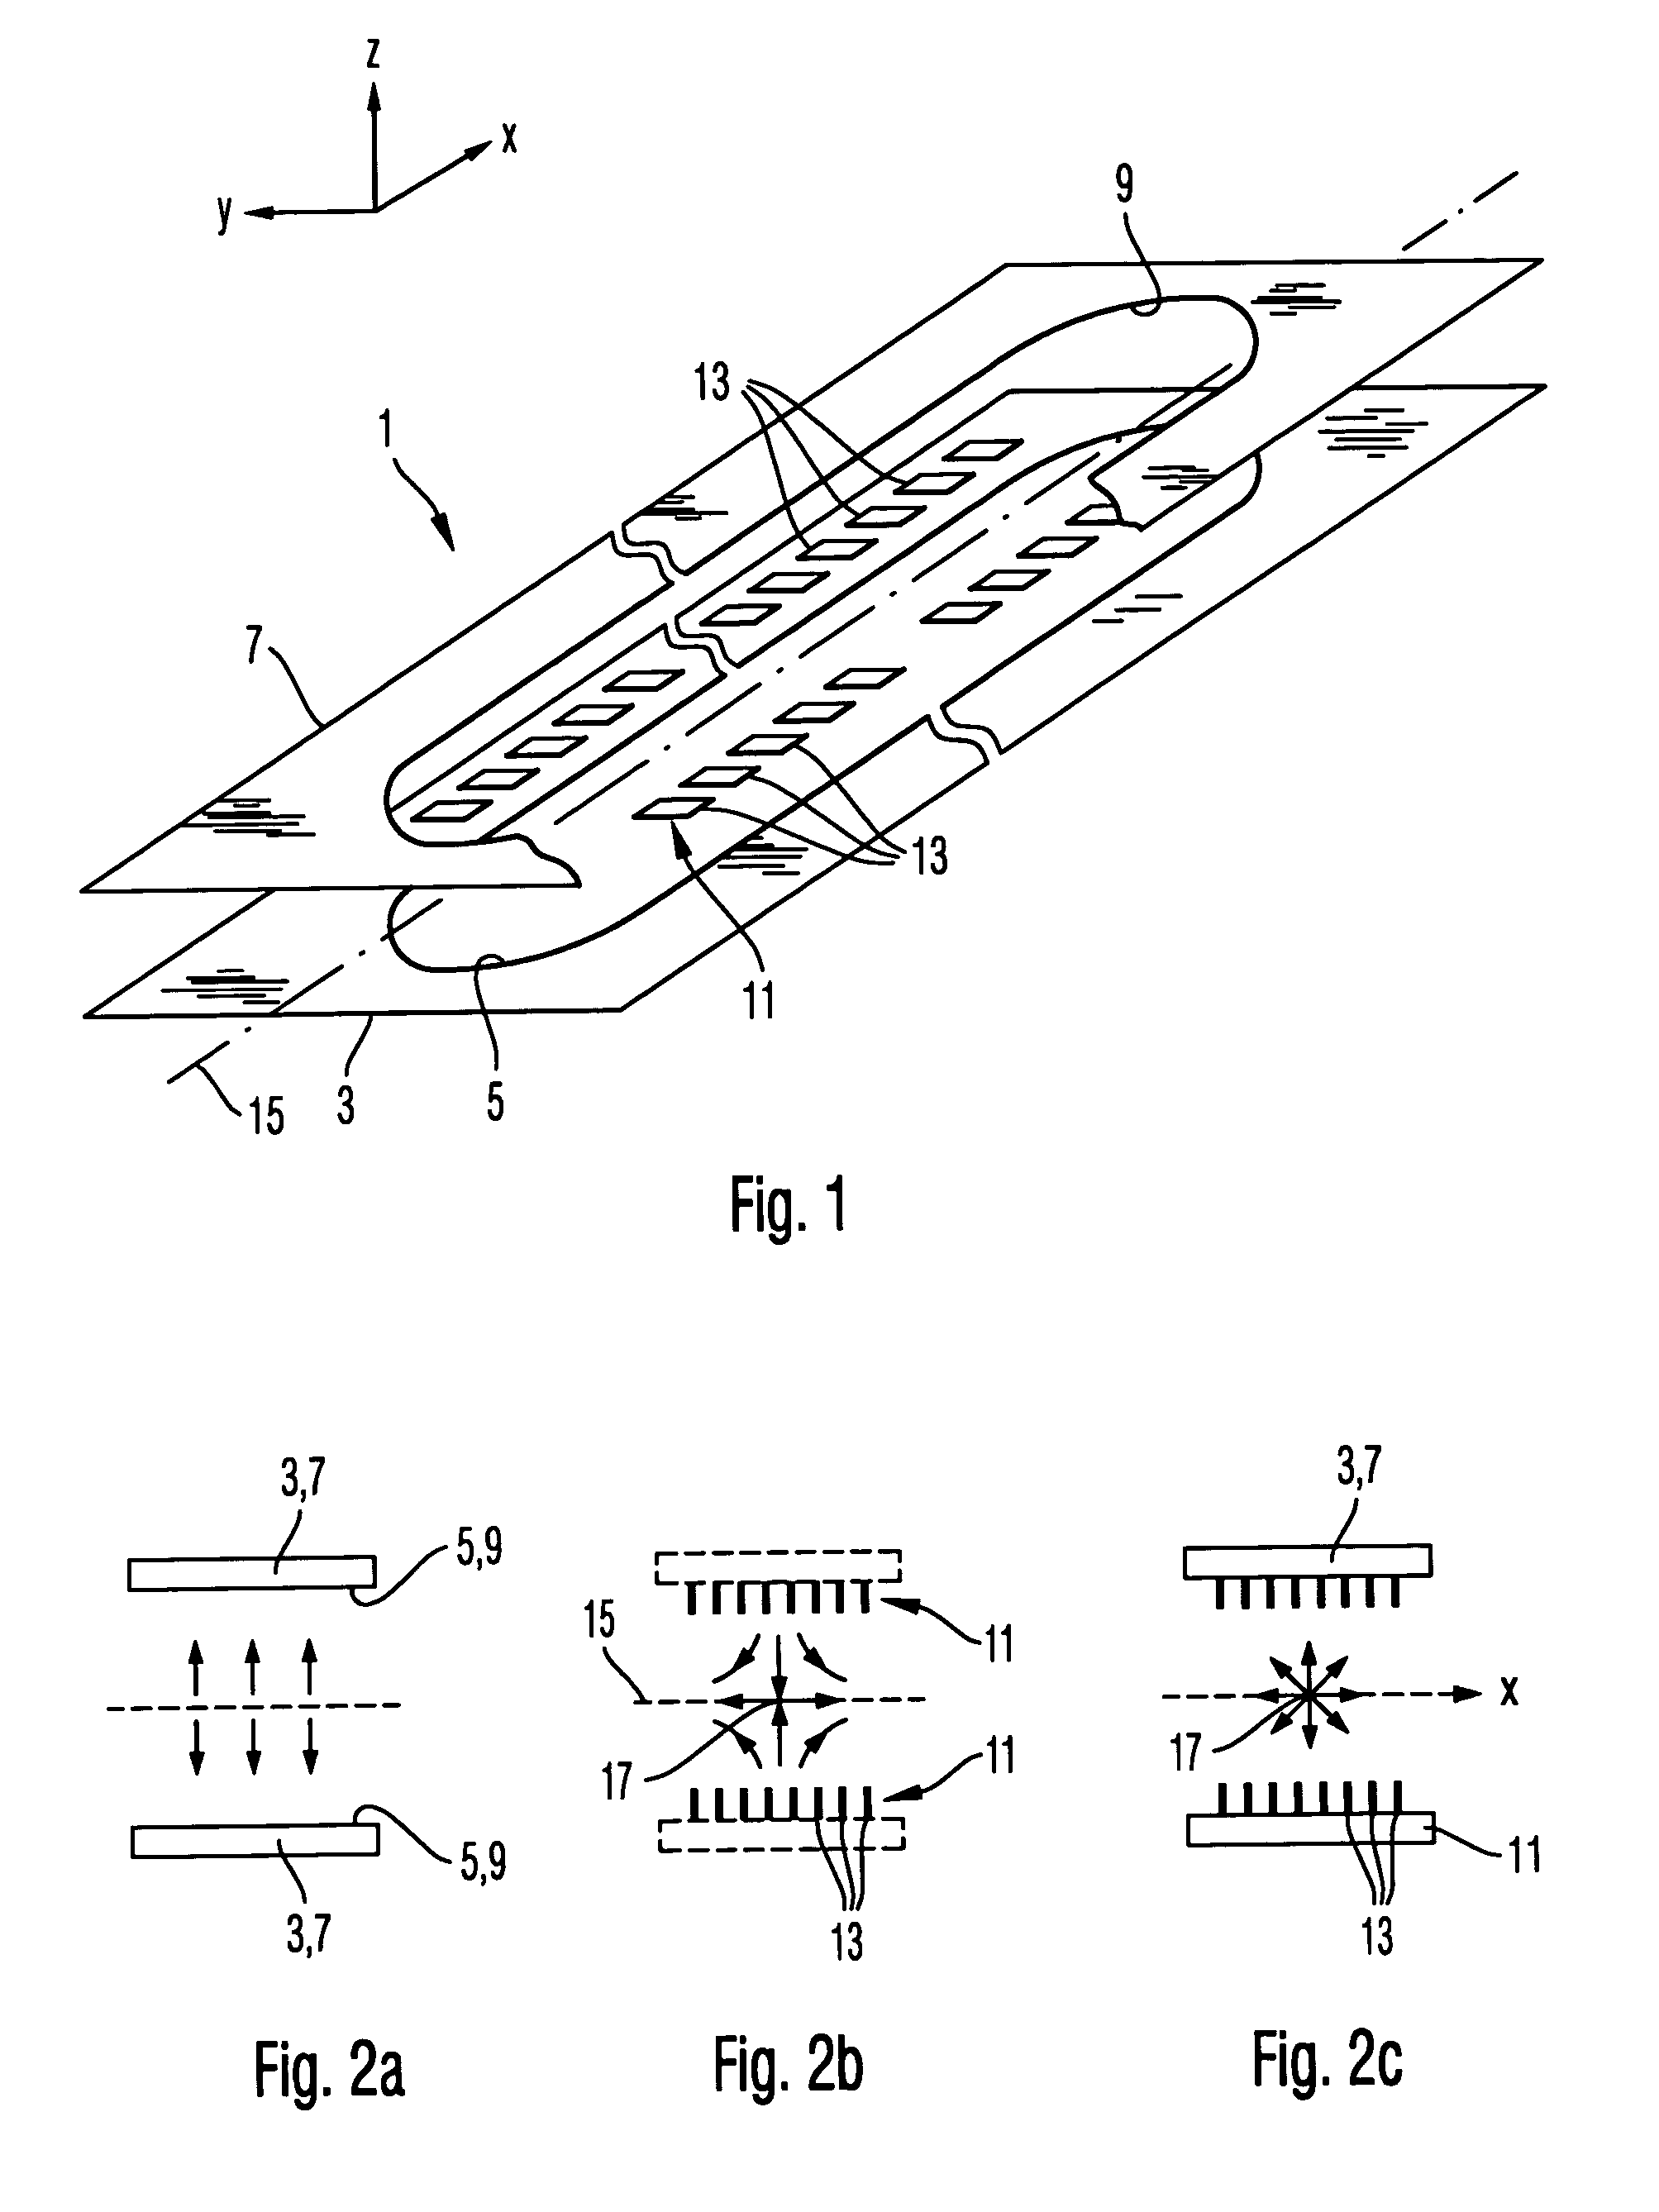 Particle-optical apparatus, electron microscopy system and electron lithography system